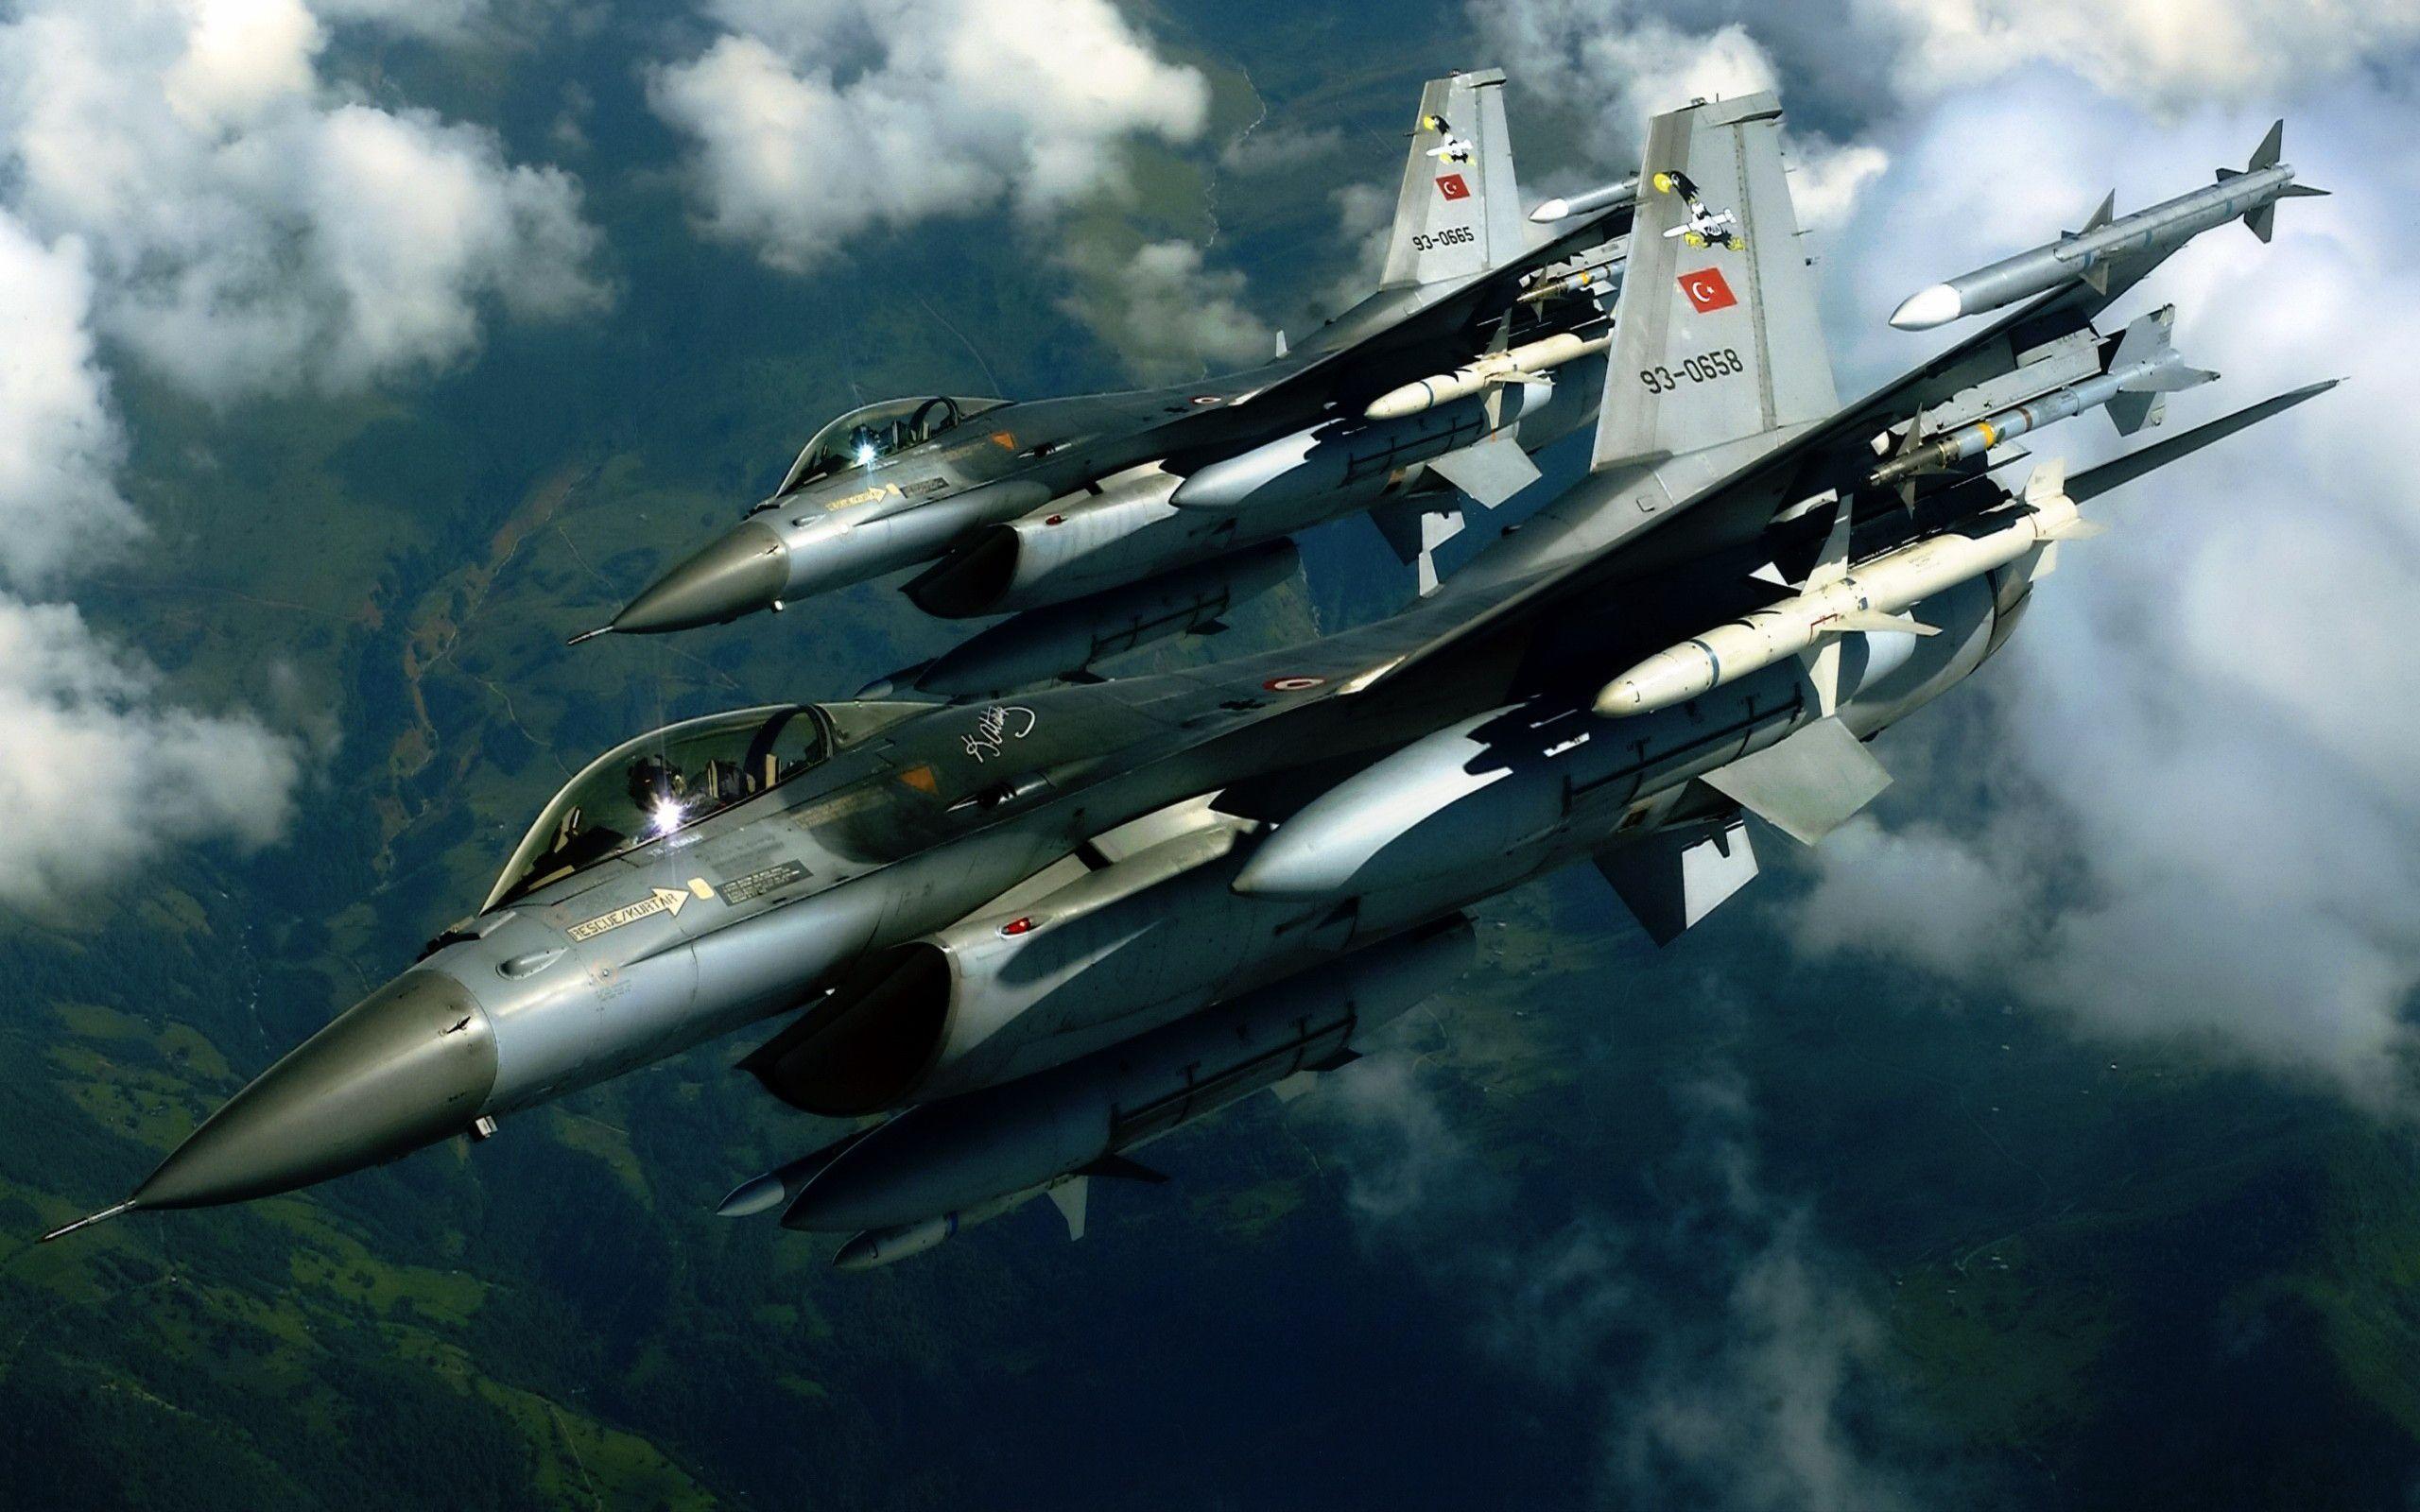 Turkish F16 Jet Fighter. Wallpaper for PC